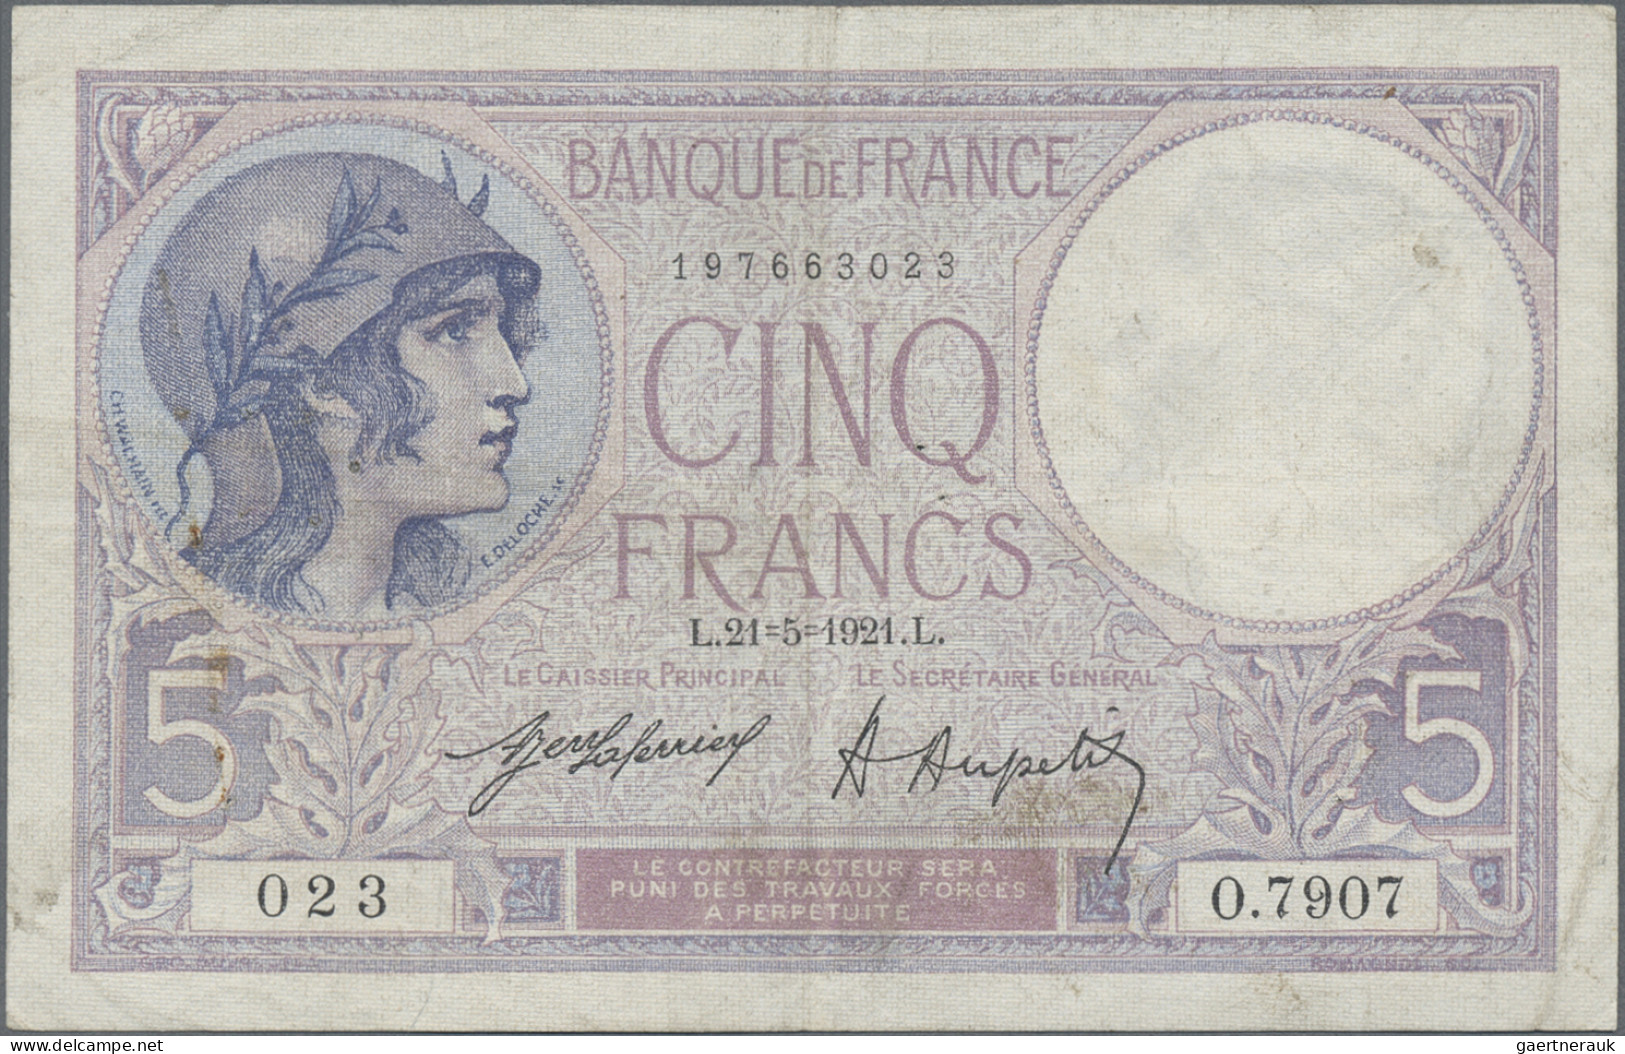 France: Banque de France, set with 6 banknotes, series 1917-1933, with 3x 5 Fran